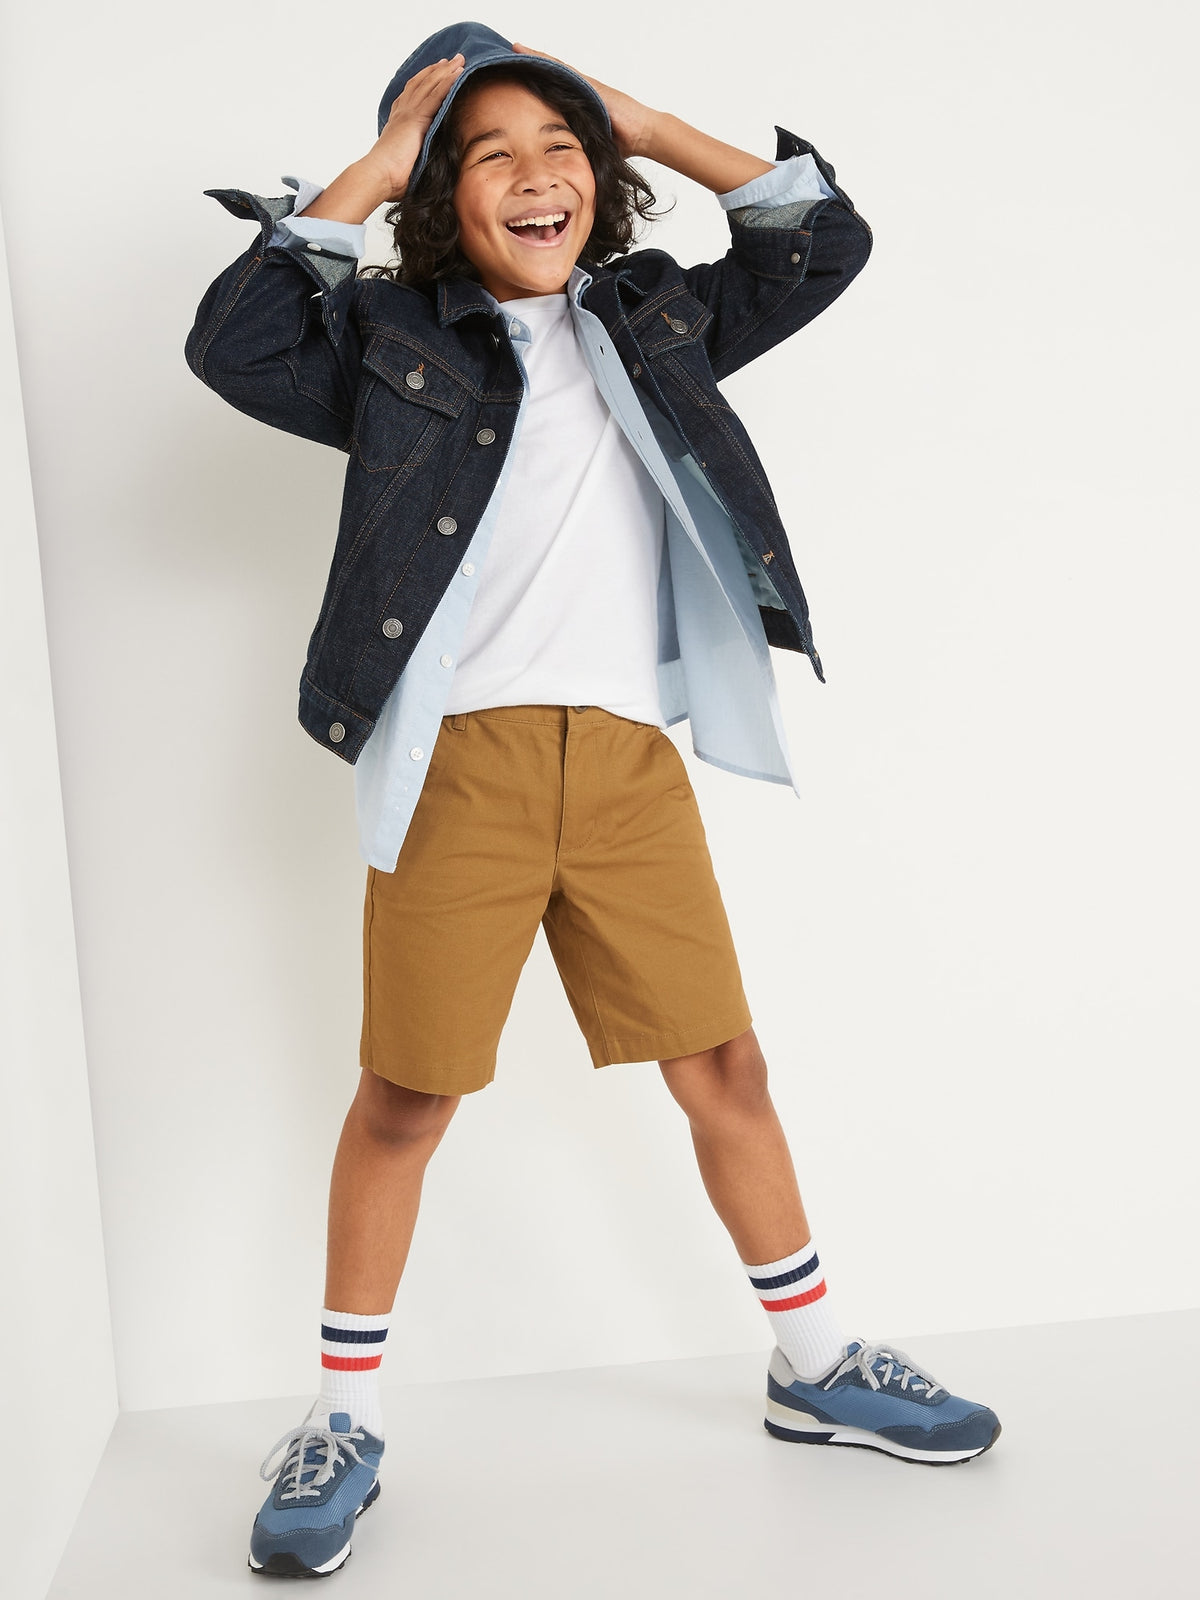 Built-In Flex Straight Twill Shorts for Boys (At Knee) - Old Navy  Philippines